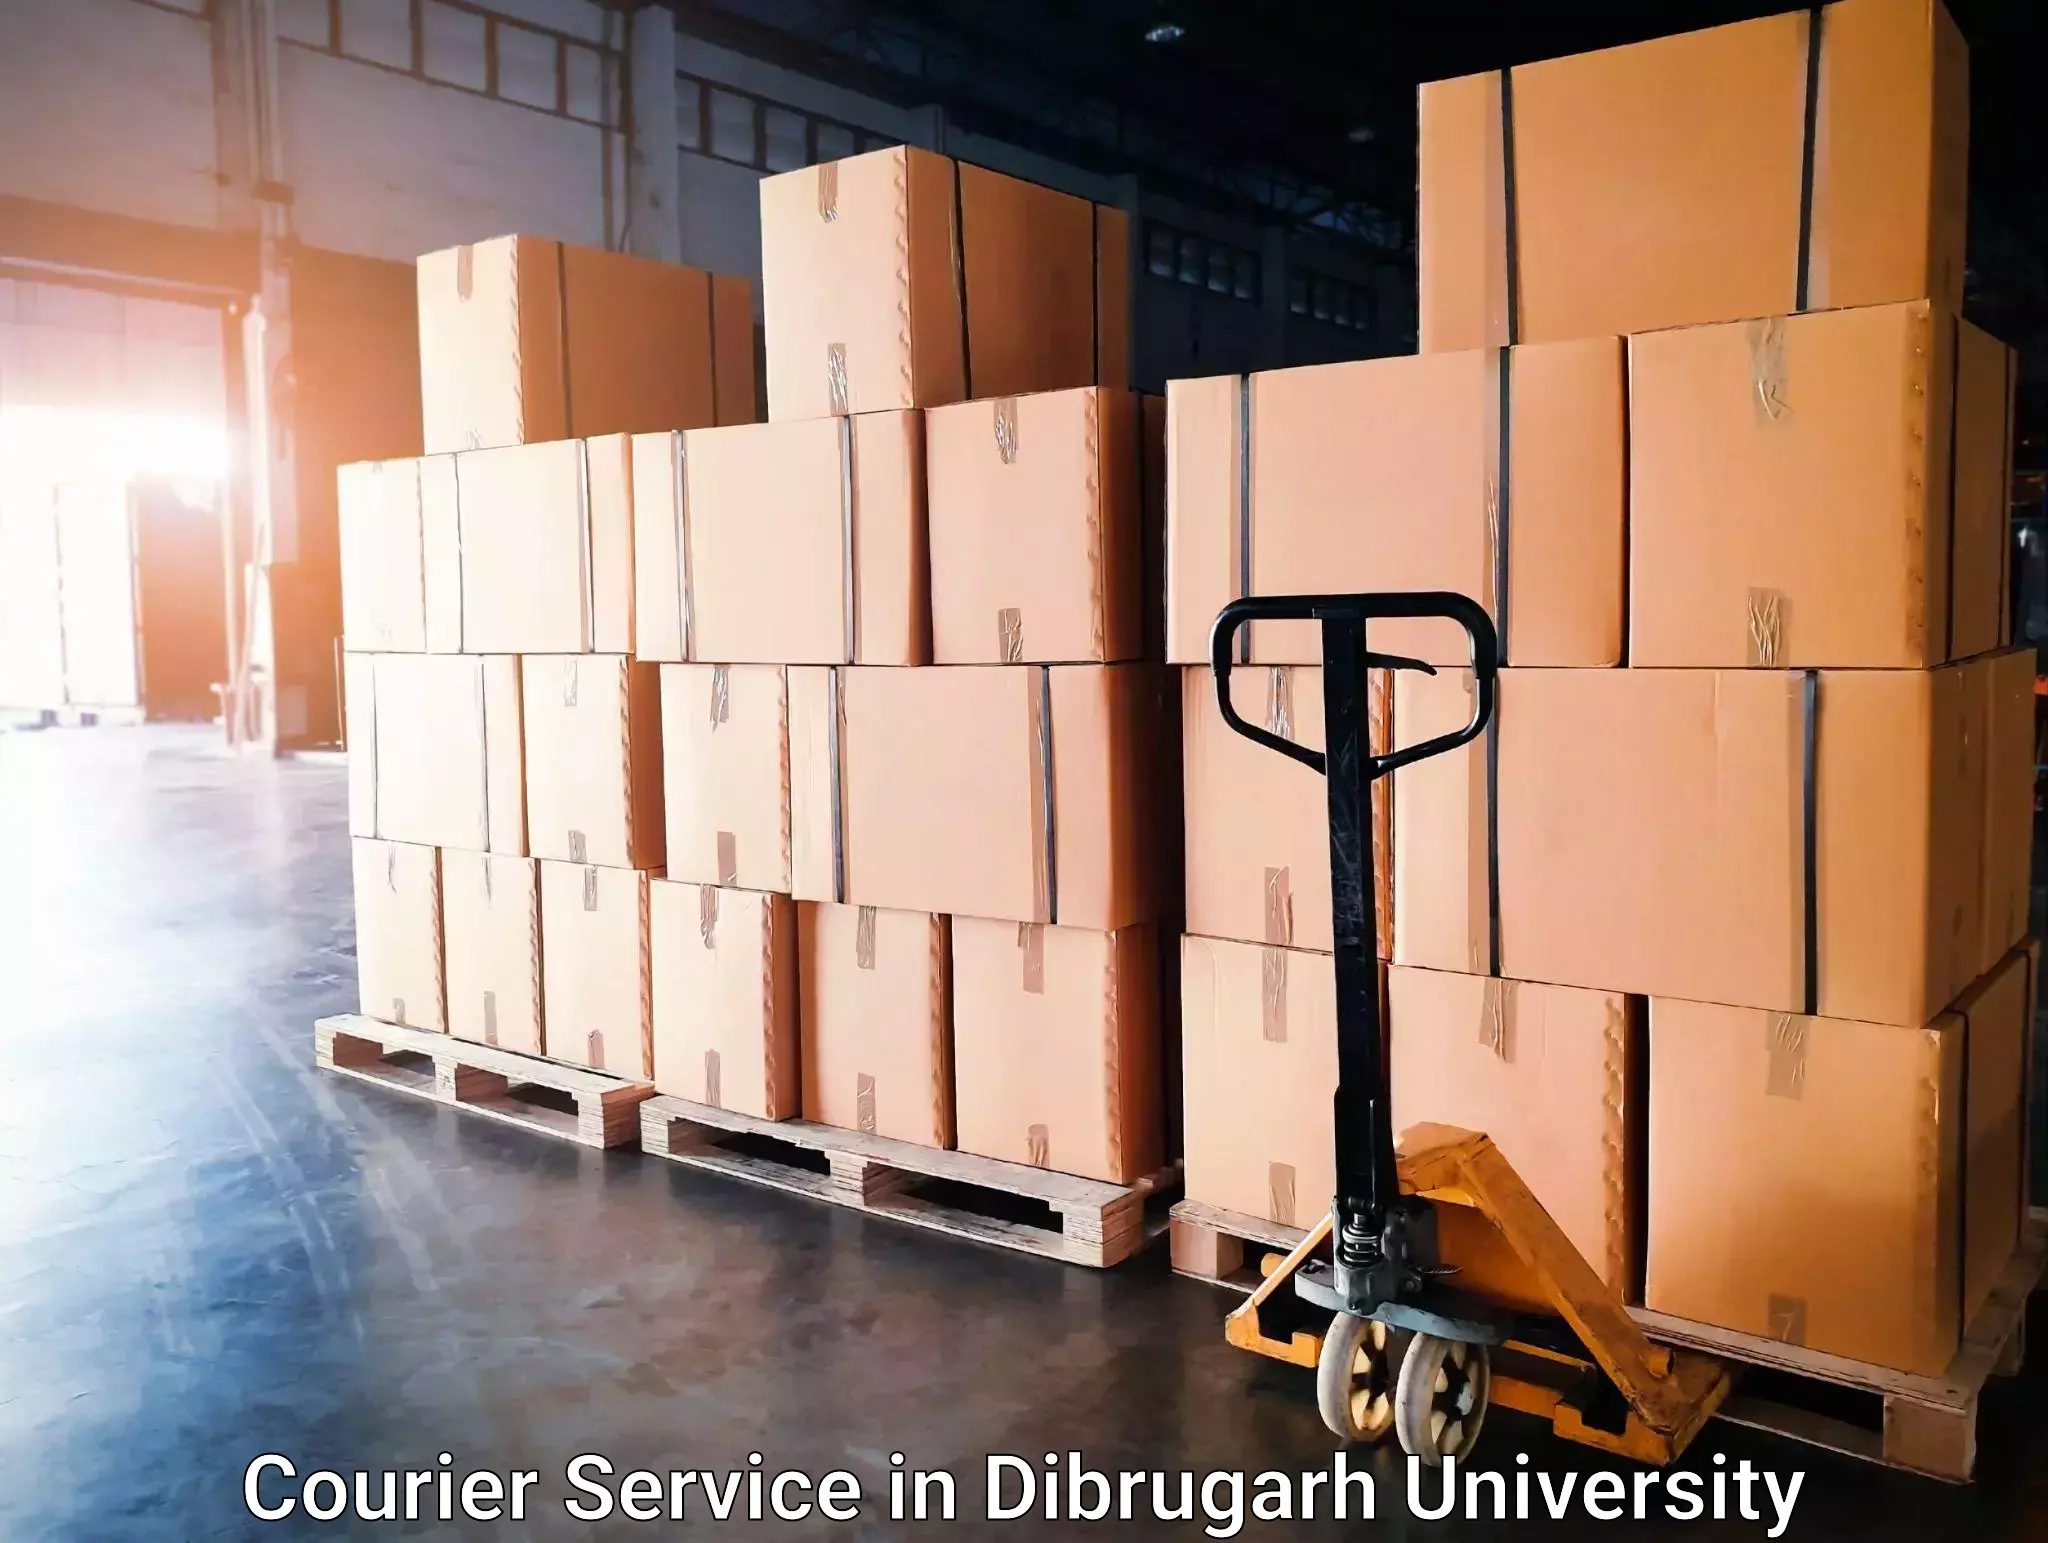 Customer-friendly courier services in Dibrugarh University